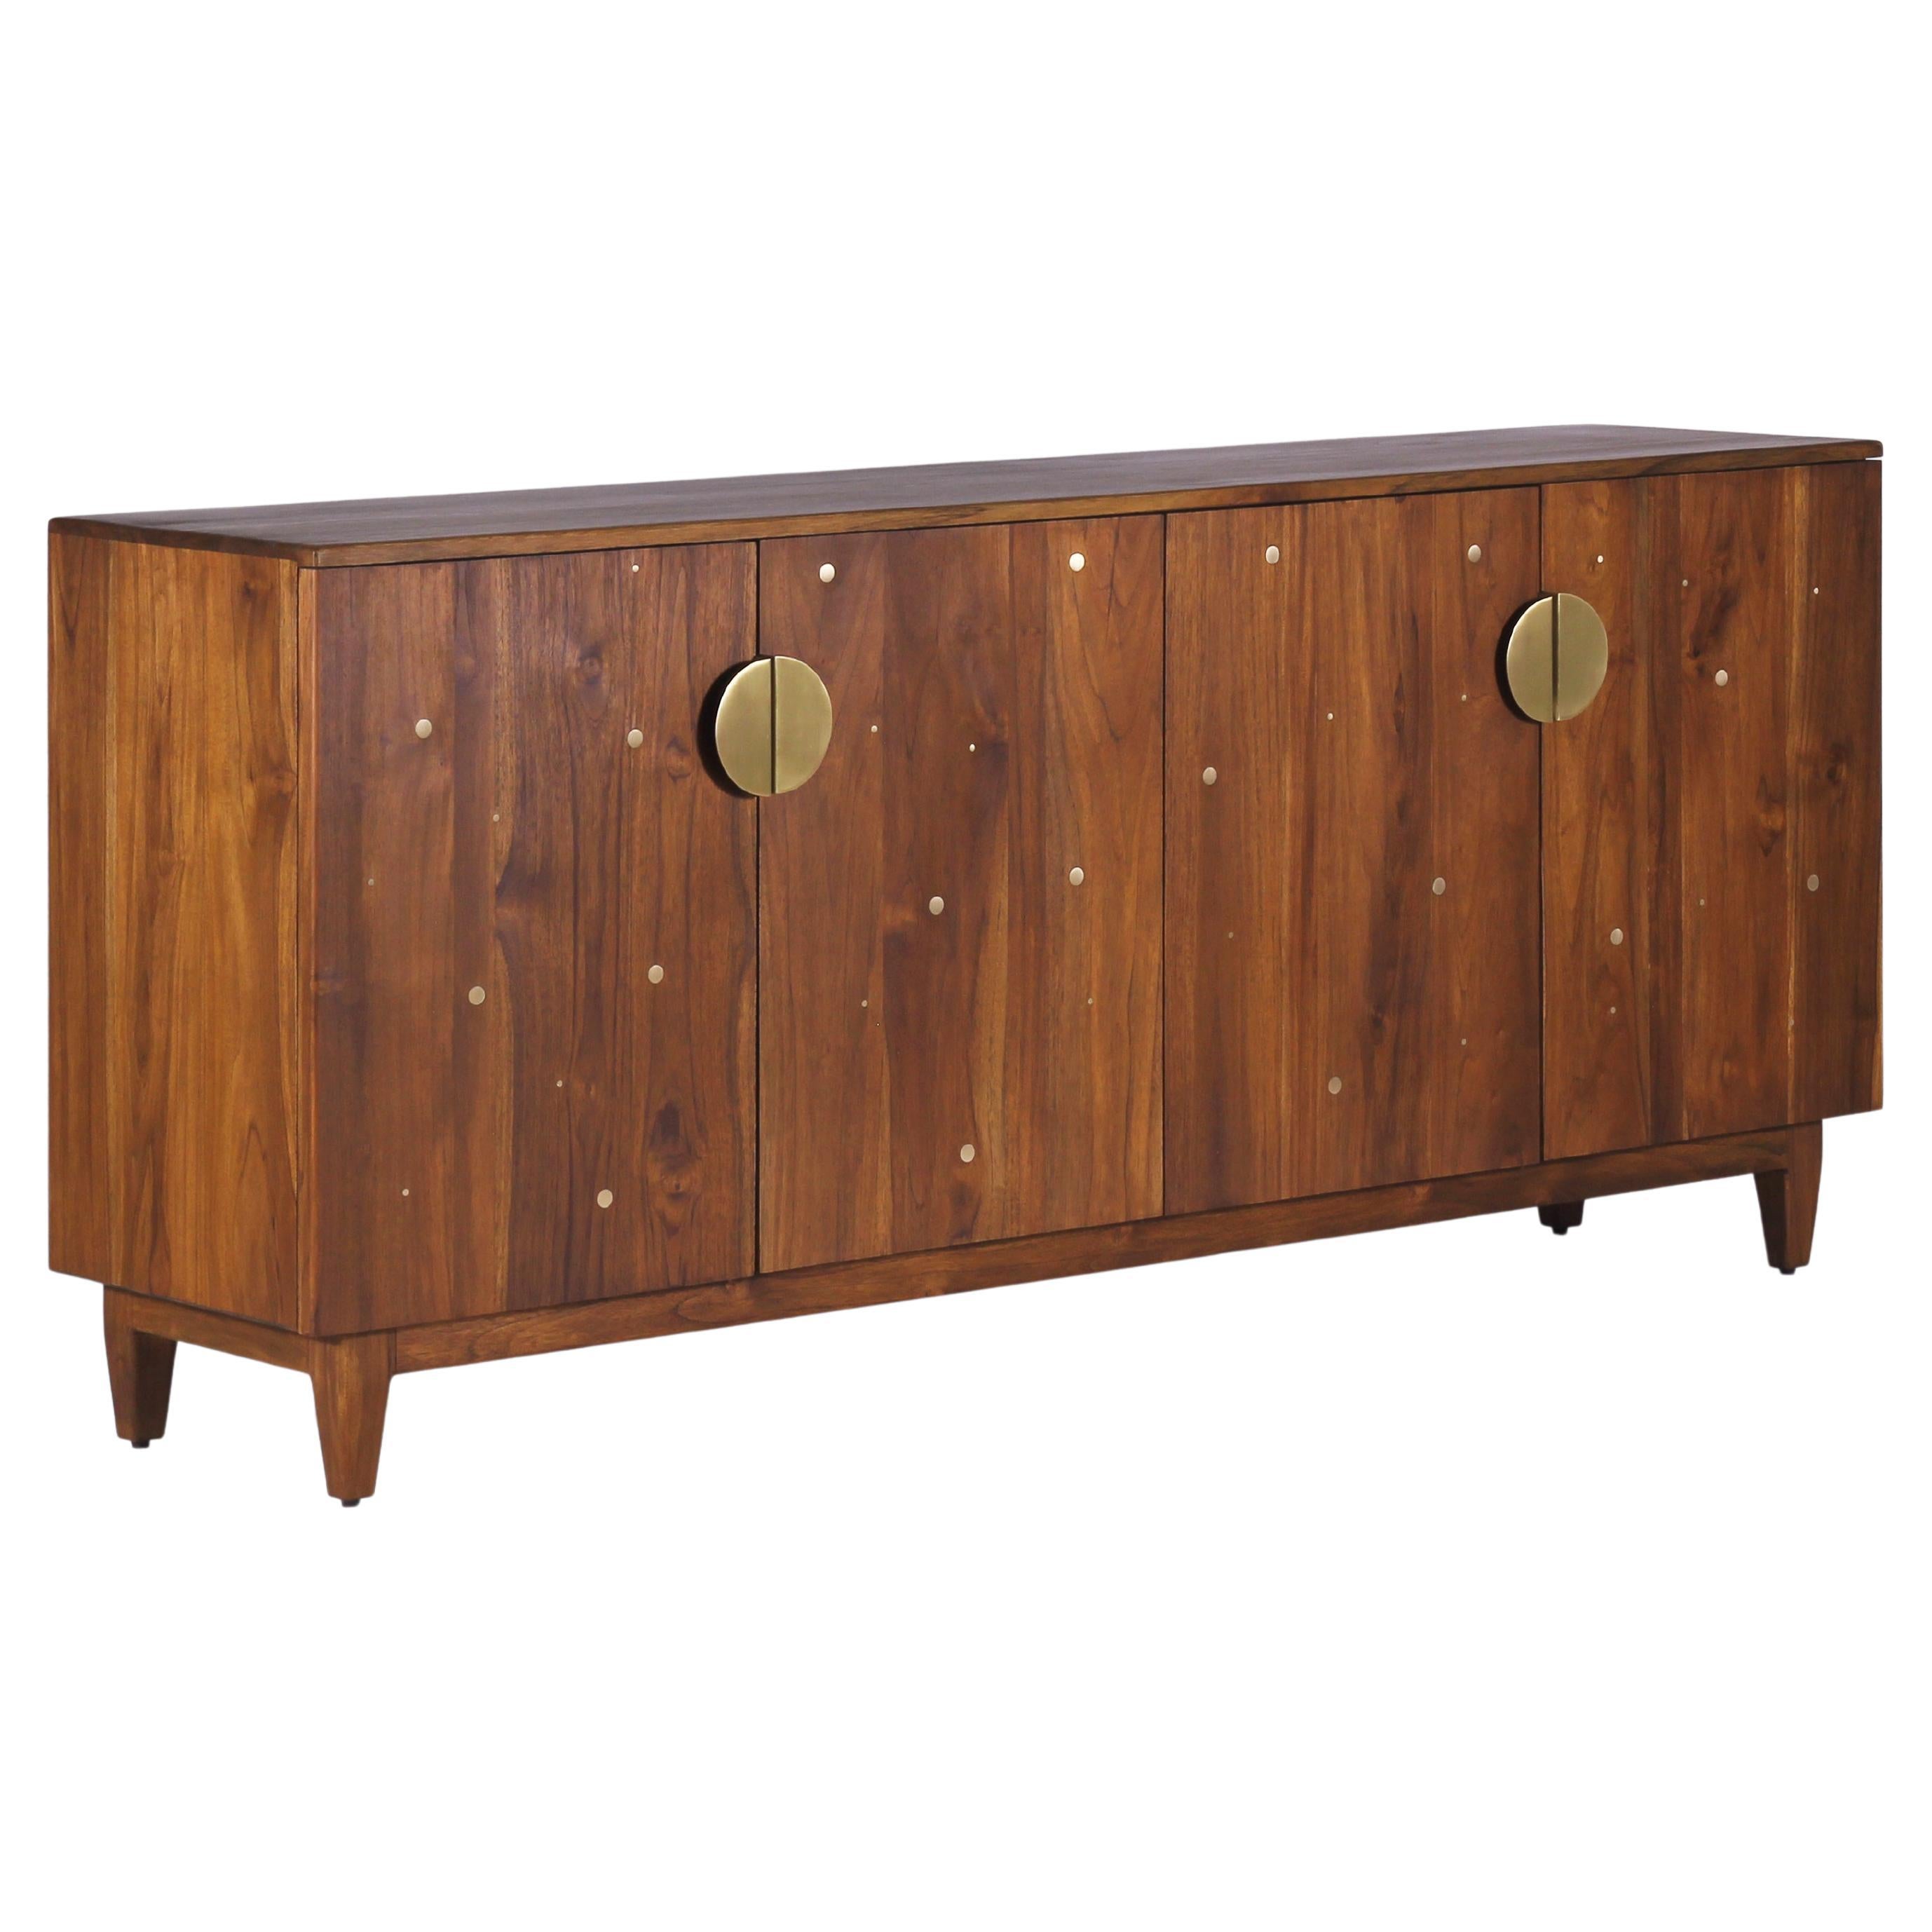 The Night Sky Credenza is a stunning storyteller created inspired by the timeless and delightful beauty in star-studded night skies. The credenza is constructed through joinery in solid oak. Its solid brass handles are handcrafted with care and